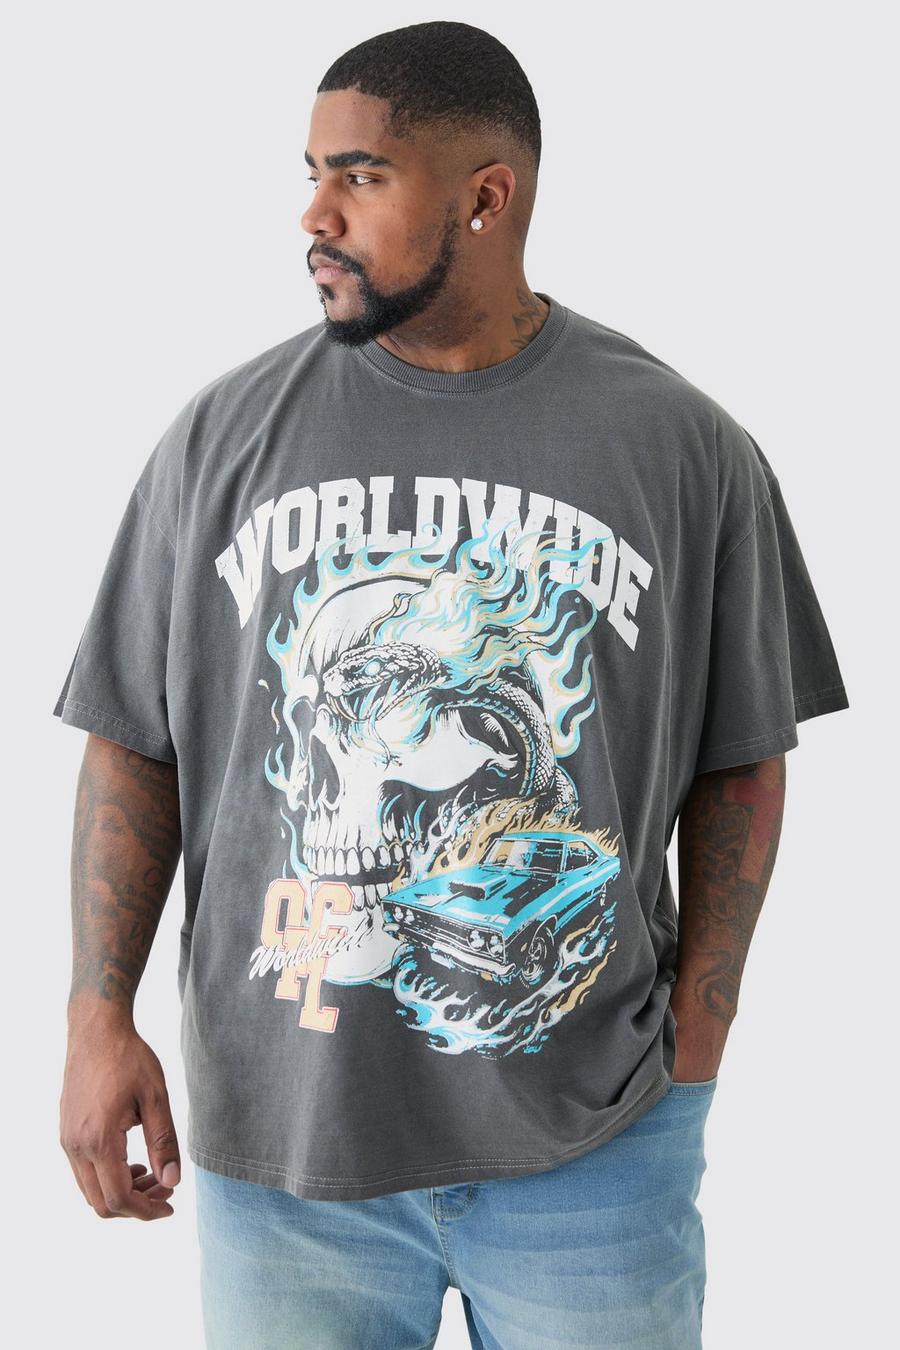 T-shirt Plus Size Worldwide in lavaggio acido con caratteri gotici, Grey image number 1